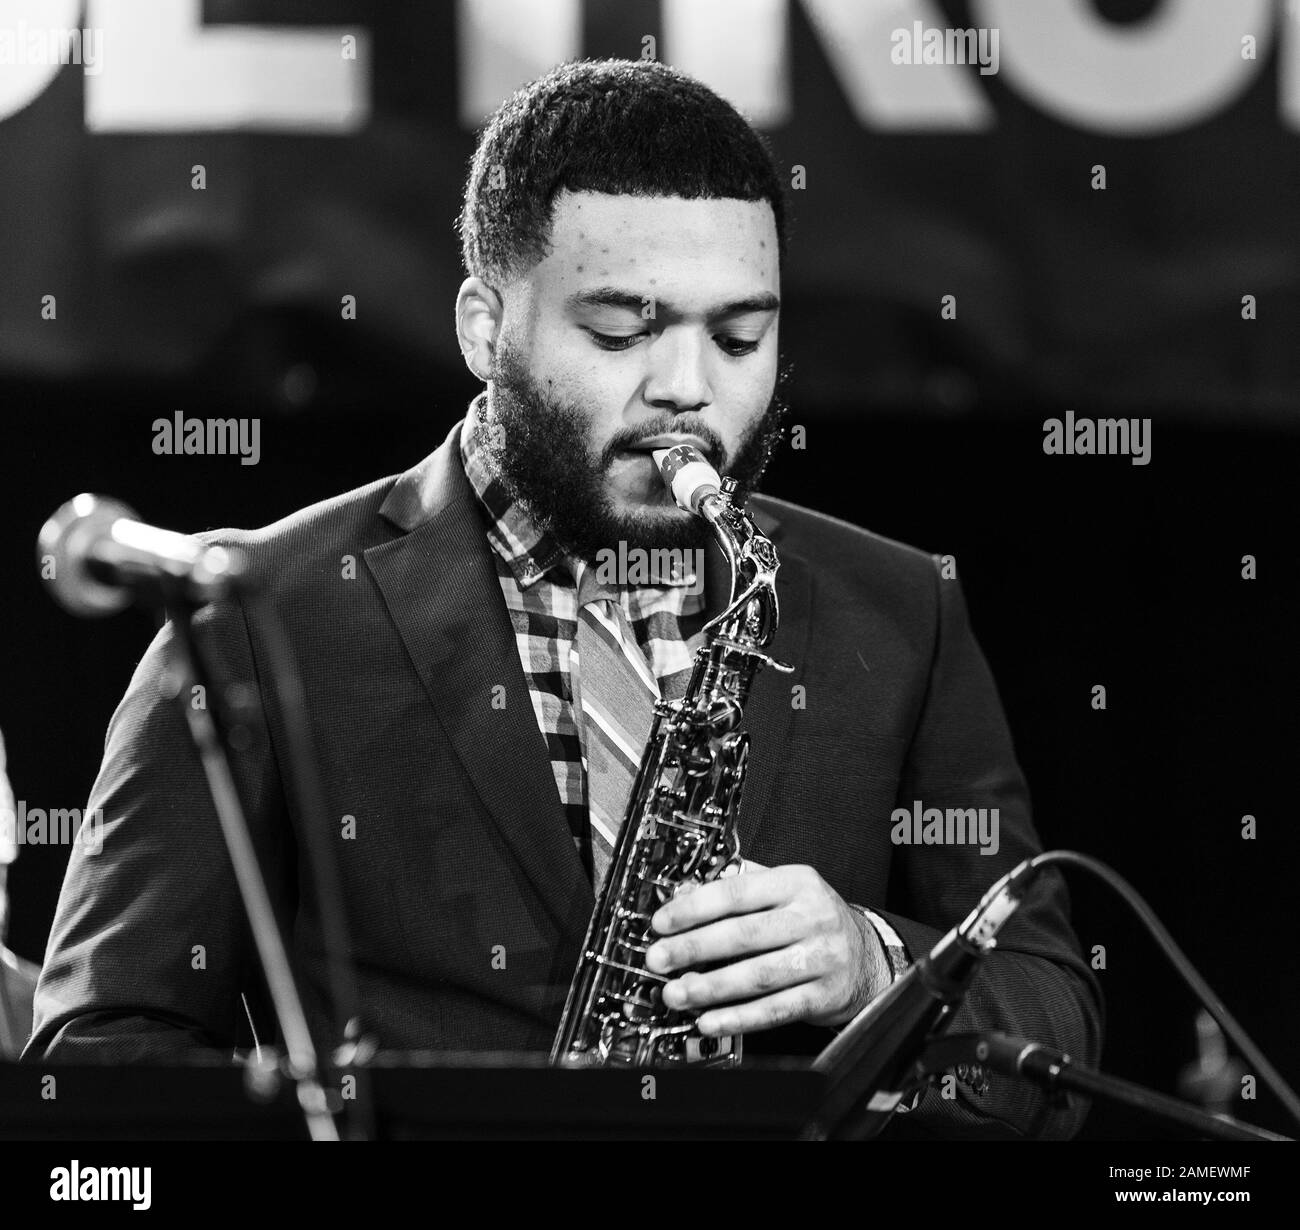 New York, United States. 12th Jan, 2020. Kasan Belgrave performs during From Detroit to the World concert celebrating Marcus Belgrave as part of Winter Jazz Festival at (le) Poisson Rouge (Photo by Lev Radin/Pacific Press) Credit: Pacific Press Agency/Alamy Live News Stock Photo